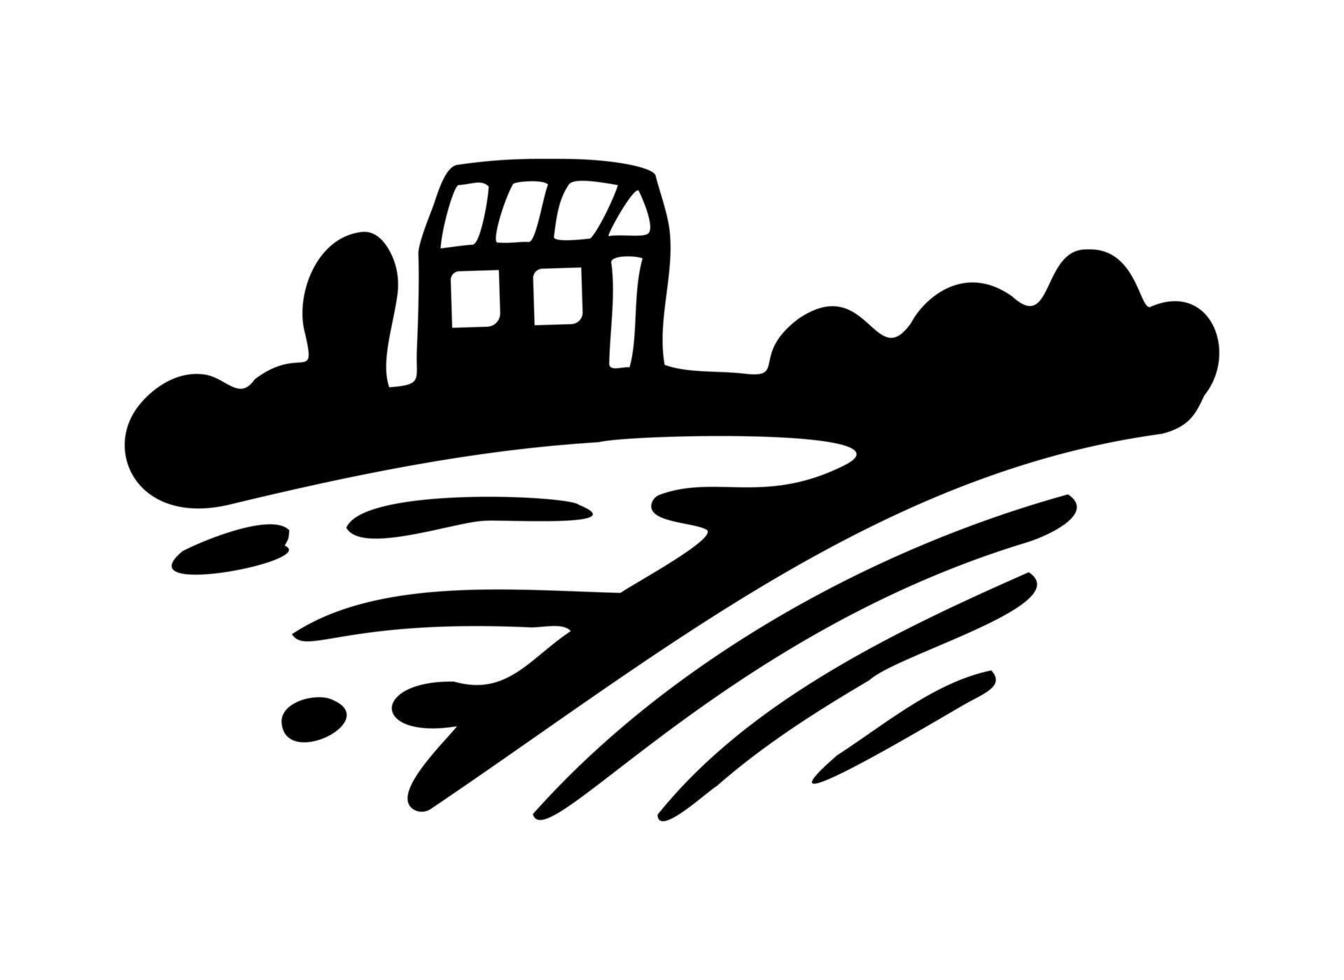 Village with fields and sun. Rural landscape with small farm and trees. Hand drawn engraving style. Doodle logo drawing graphic design. vector